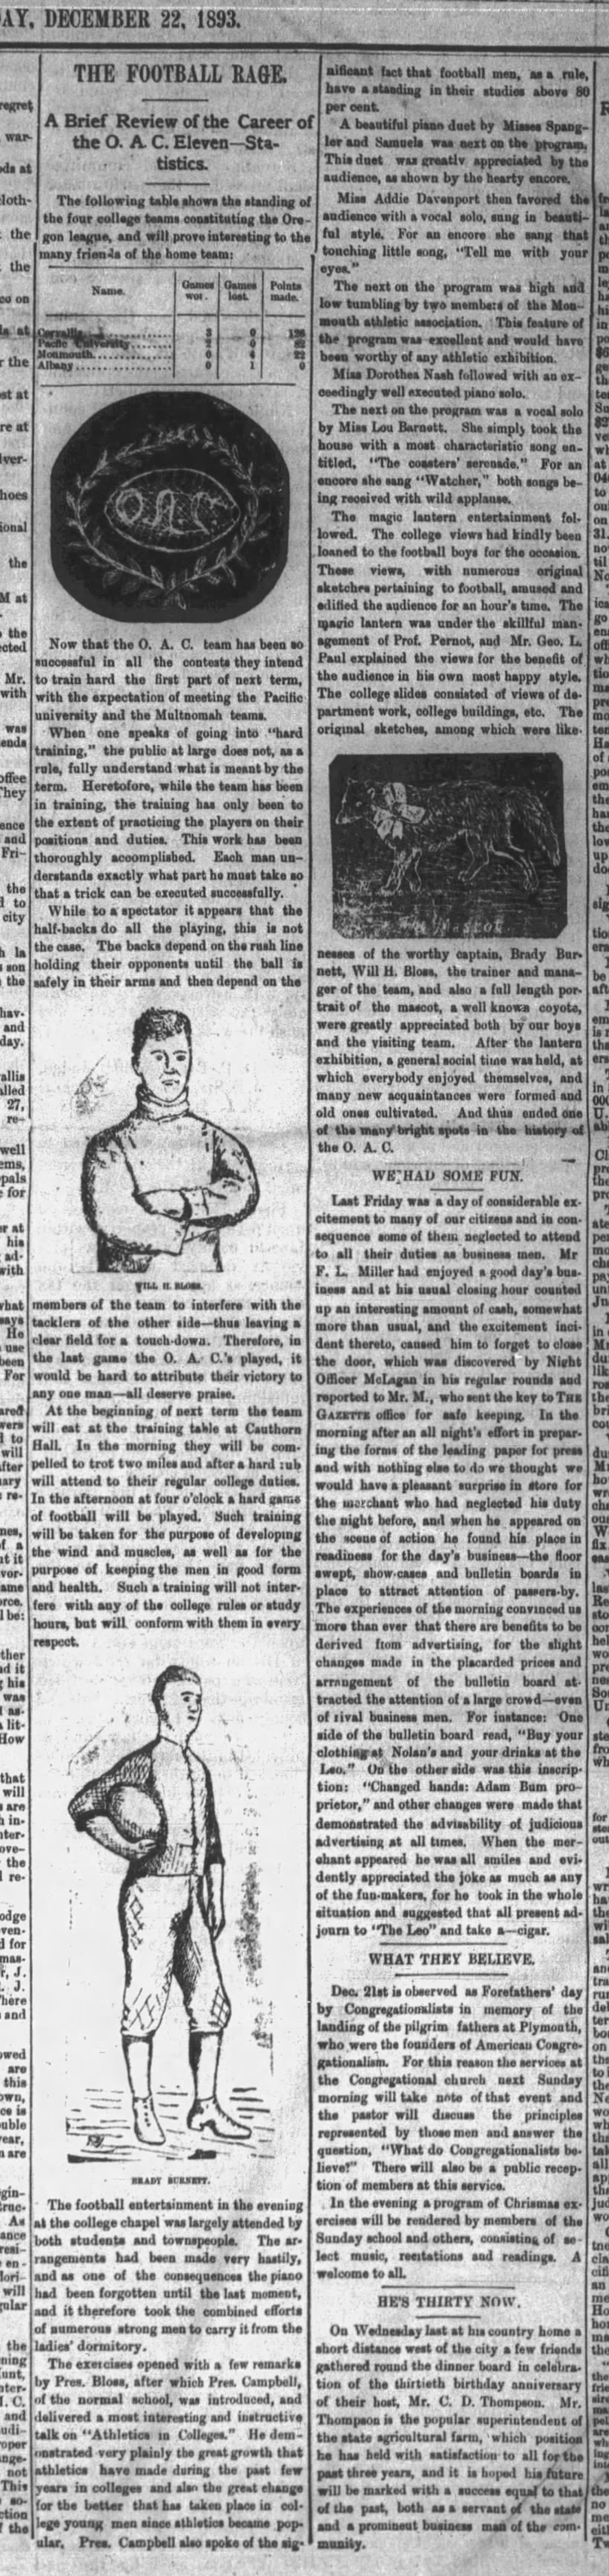 The Football Rage: Brief Review of the 1893 Oregon Agricultural College season